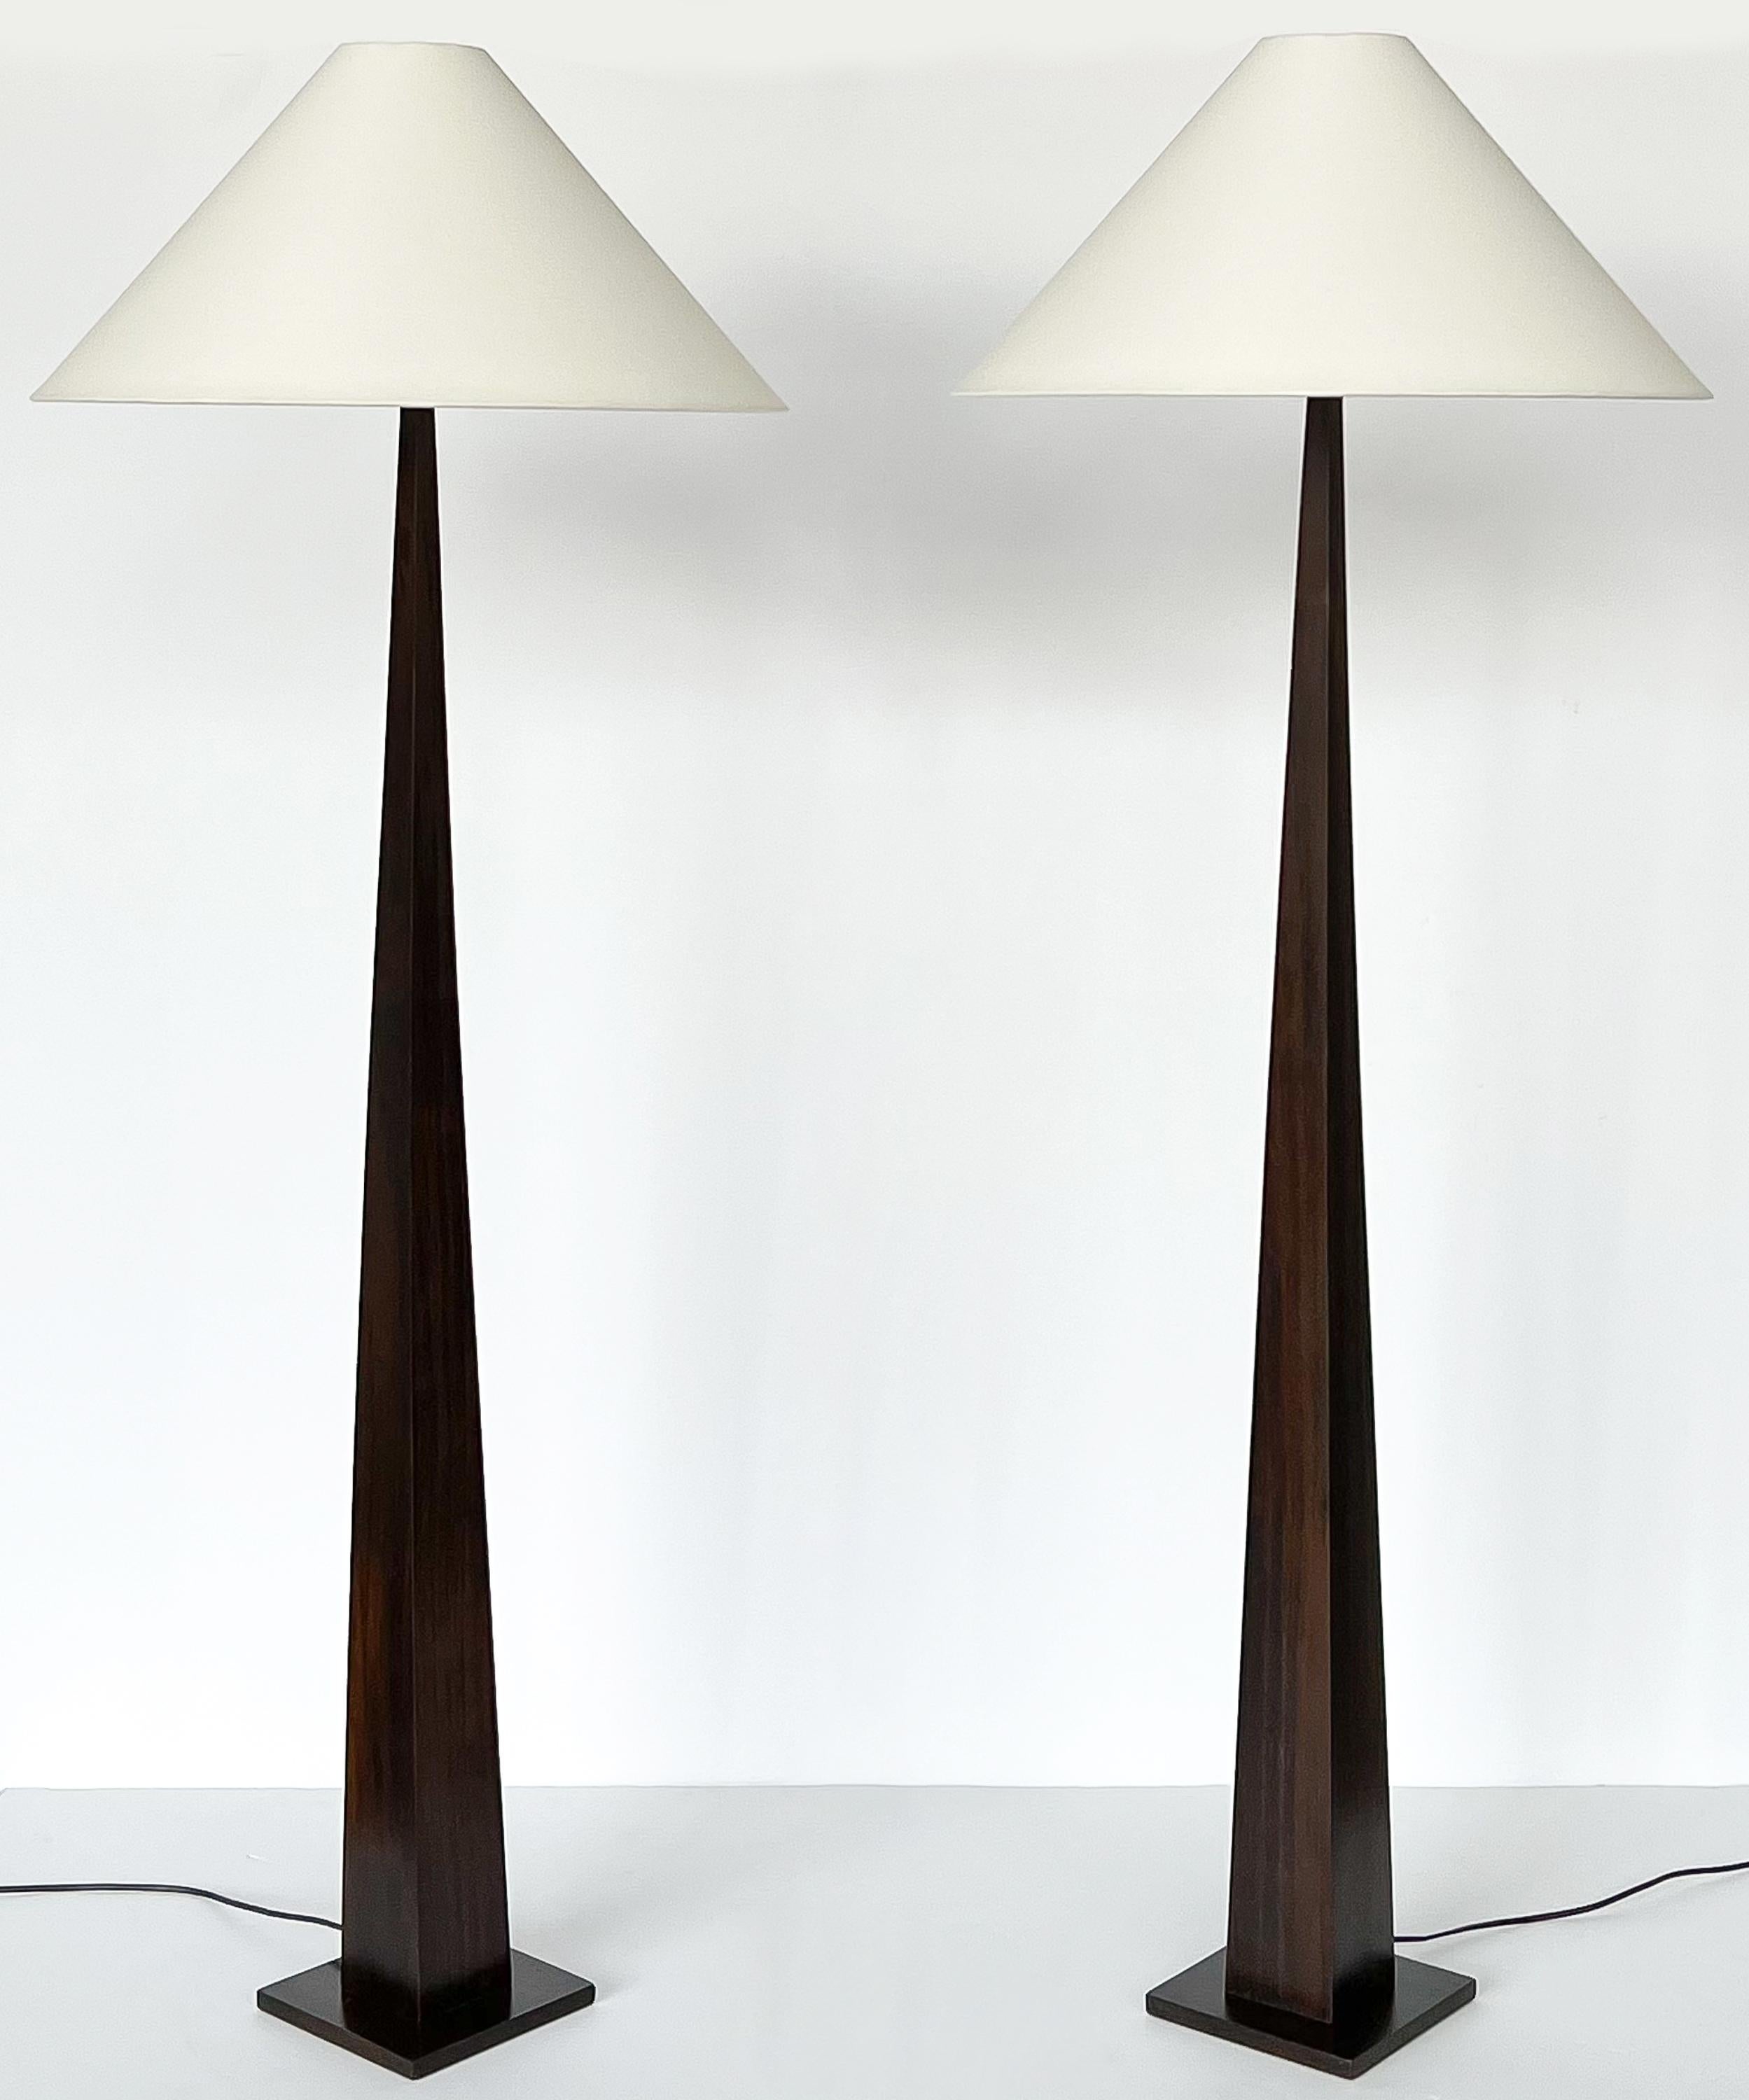 Pair of striking minimalist floor lamps by Luc Rabault for Atelier Lumens, France circa Late 20th Century. Dark stained solid wood stems tapper from 3.5